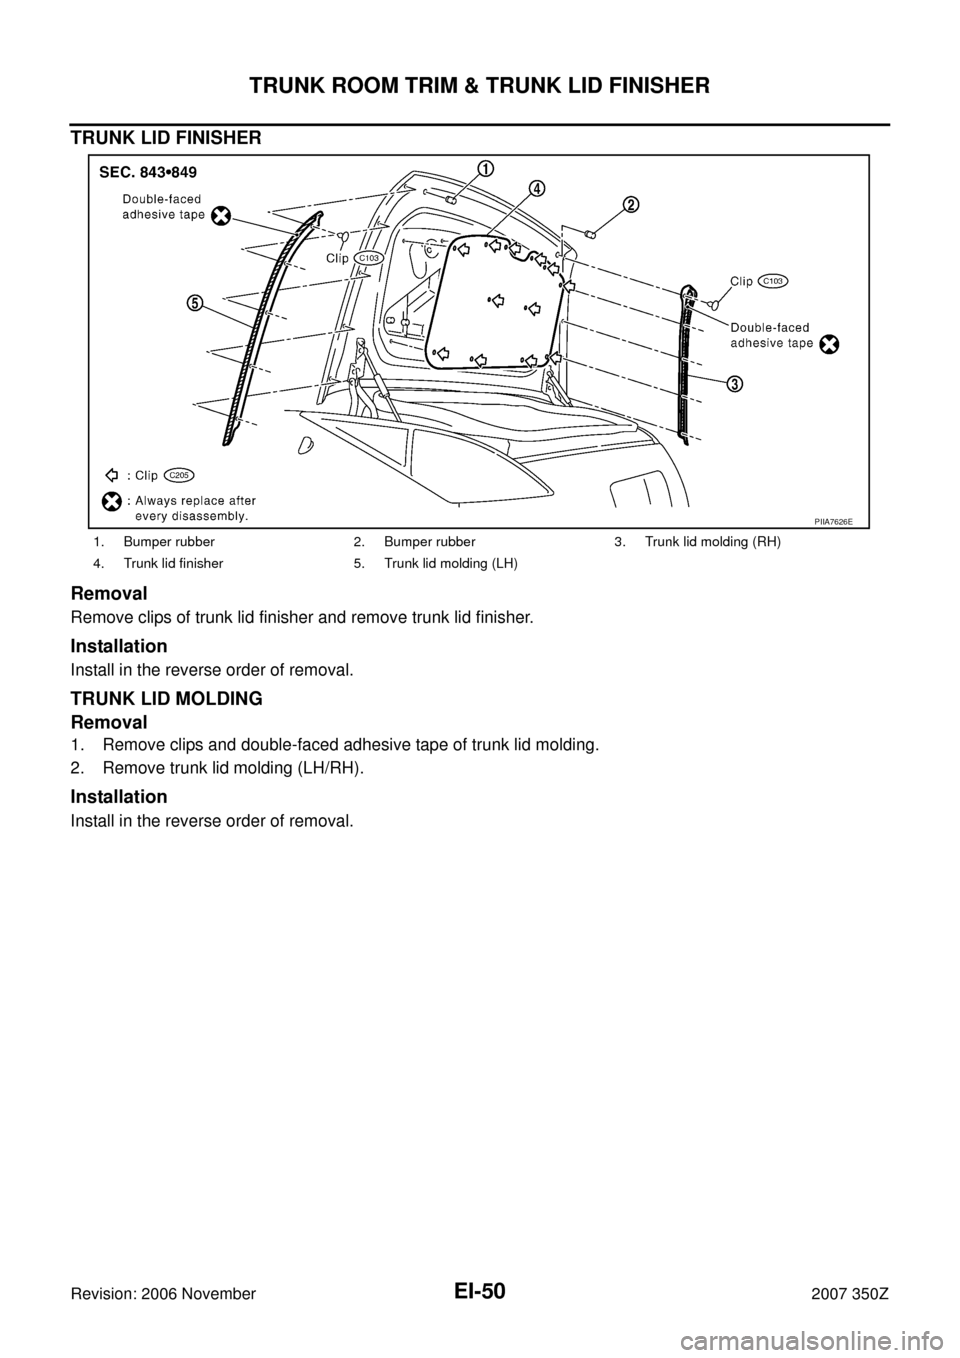 NISSAN 350Z 2007 Z33 Exterior And Interior Service Manual EI-50
TRUNK ROOM TRIM & TRUNK LID FINISHER
Revision: 2006 November2007 350Z
TRUNK LID FINISHER
Removal
Remove clips of trunk lid finisher and remove trunk lid finisher.
Installation
Install in the rev